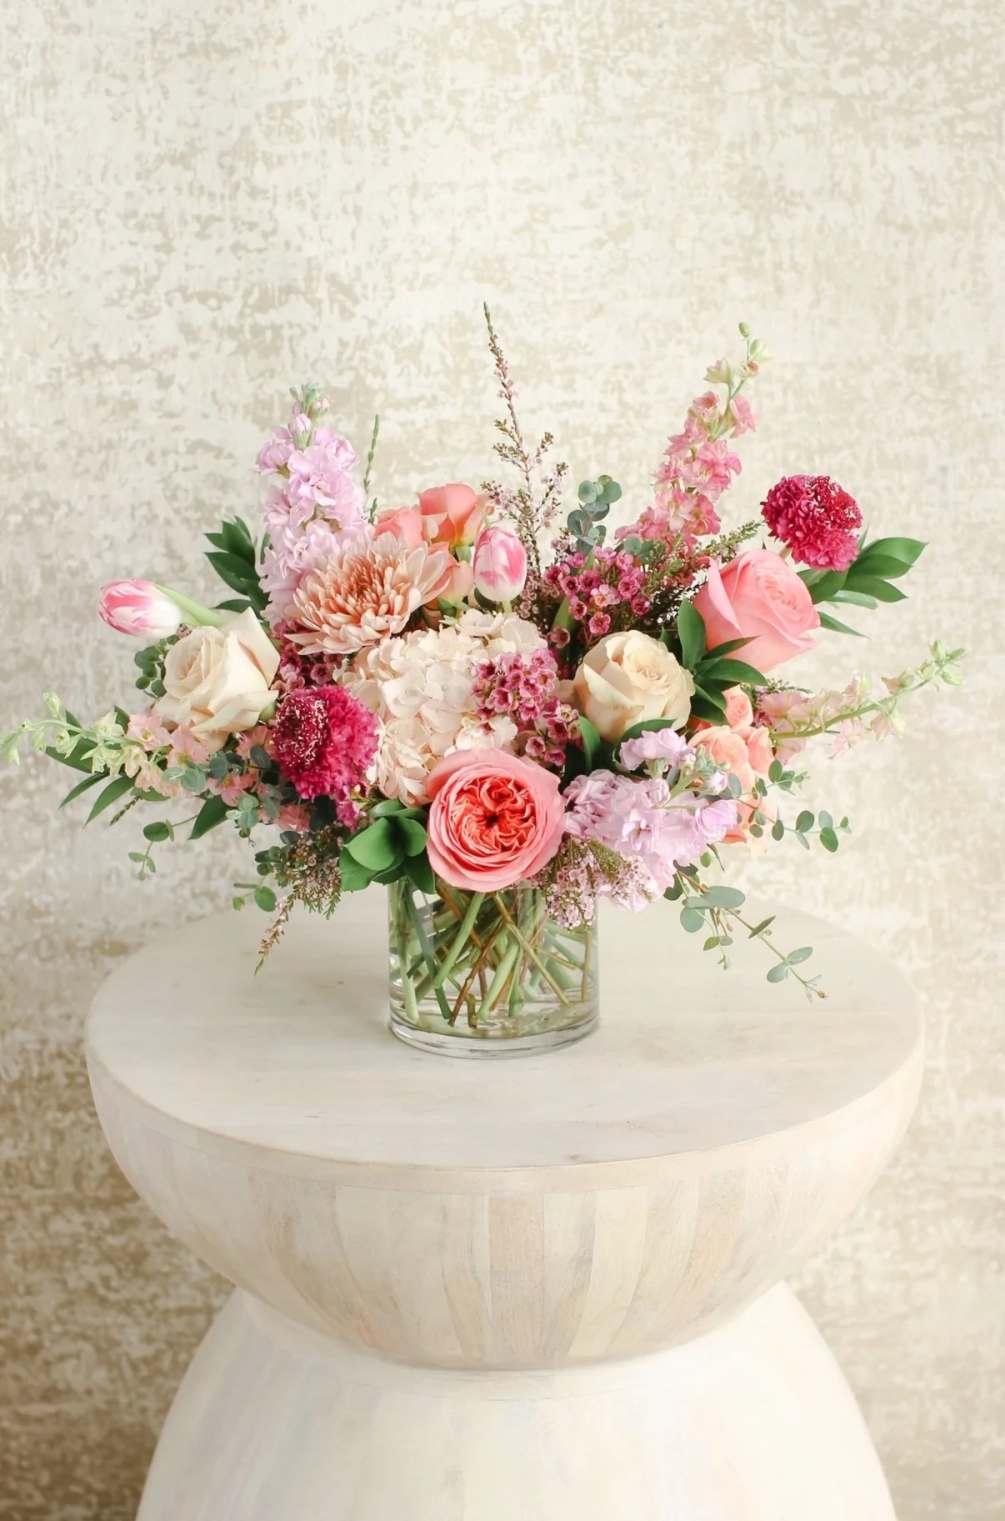 A textural fun arrangement designed in various shades of pink. Perfect to